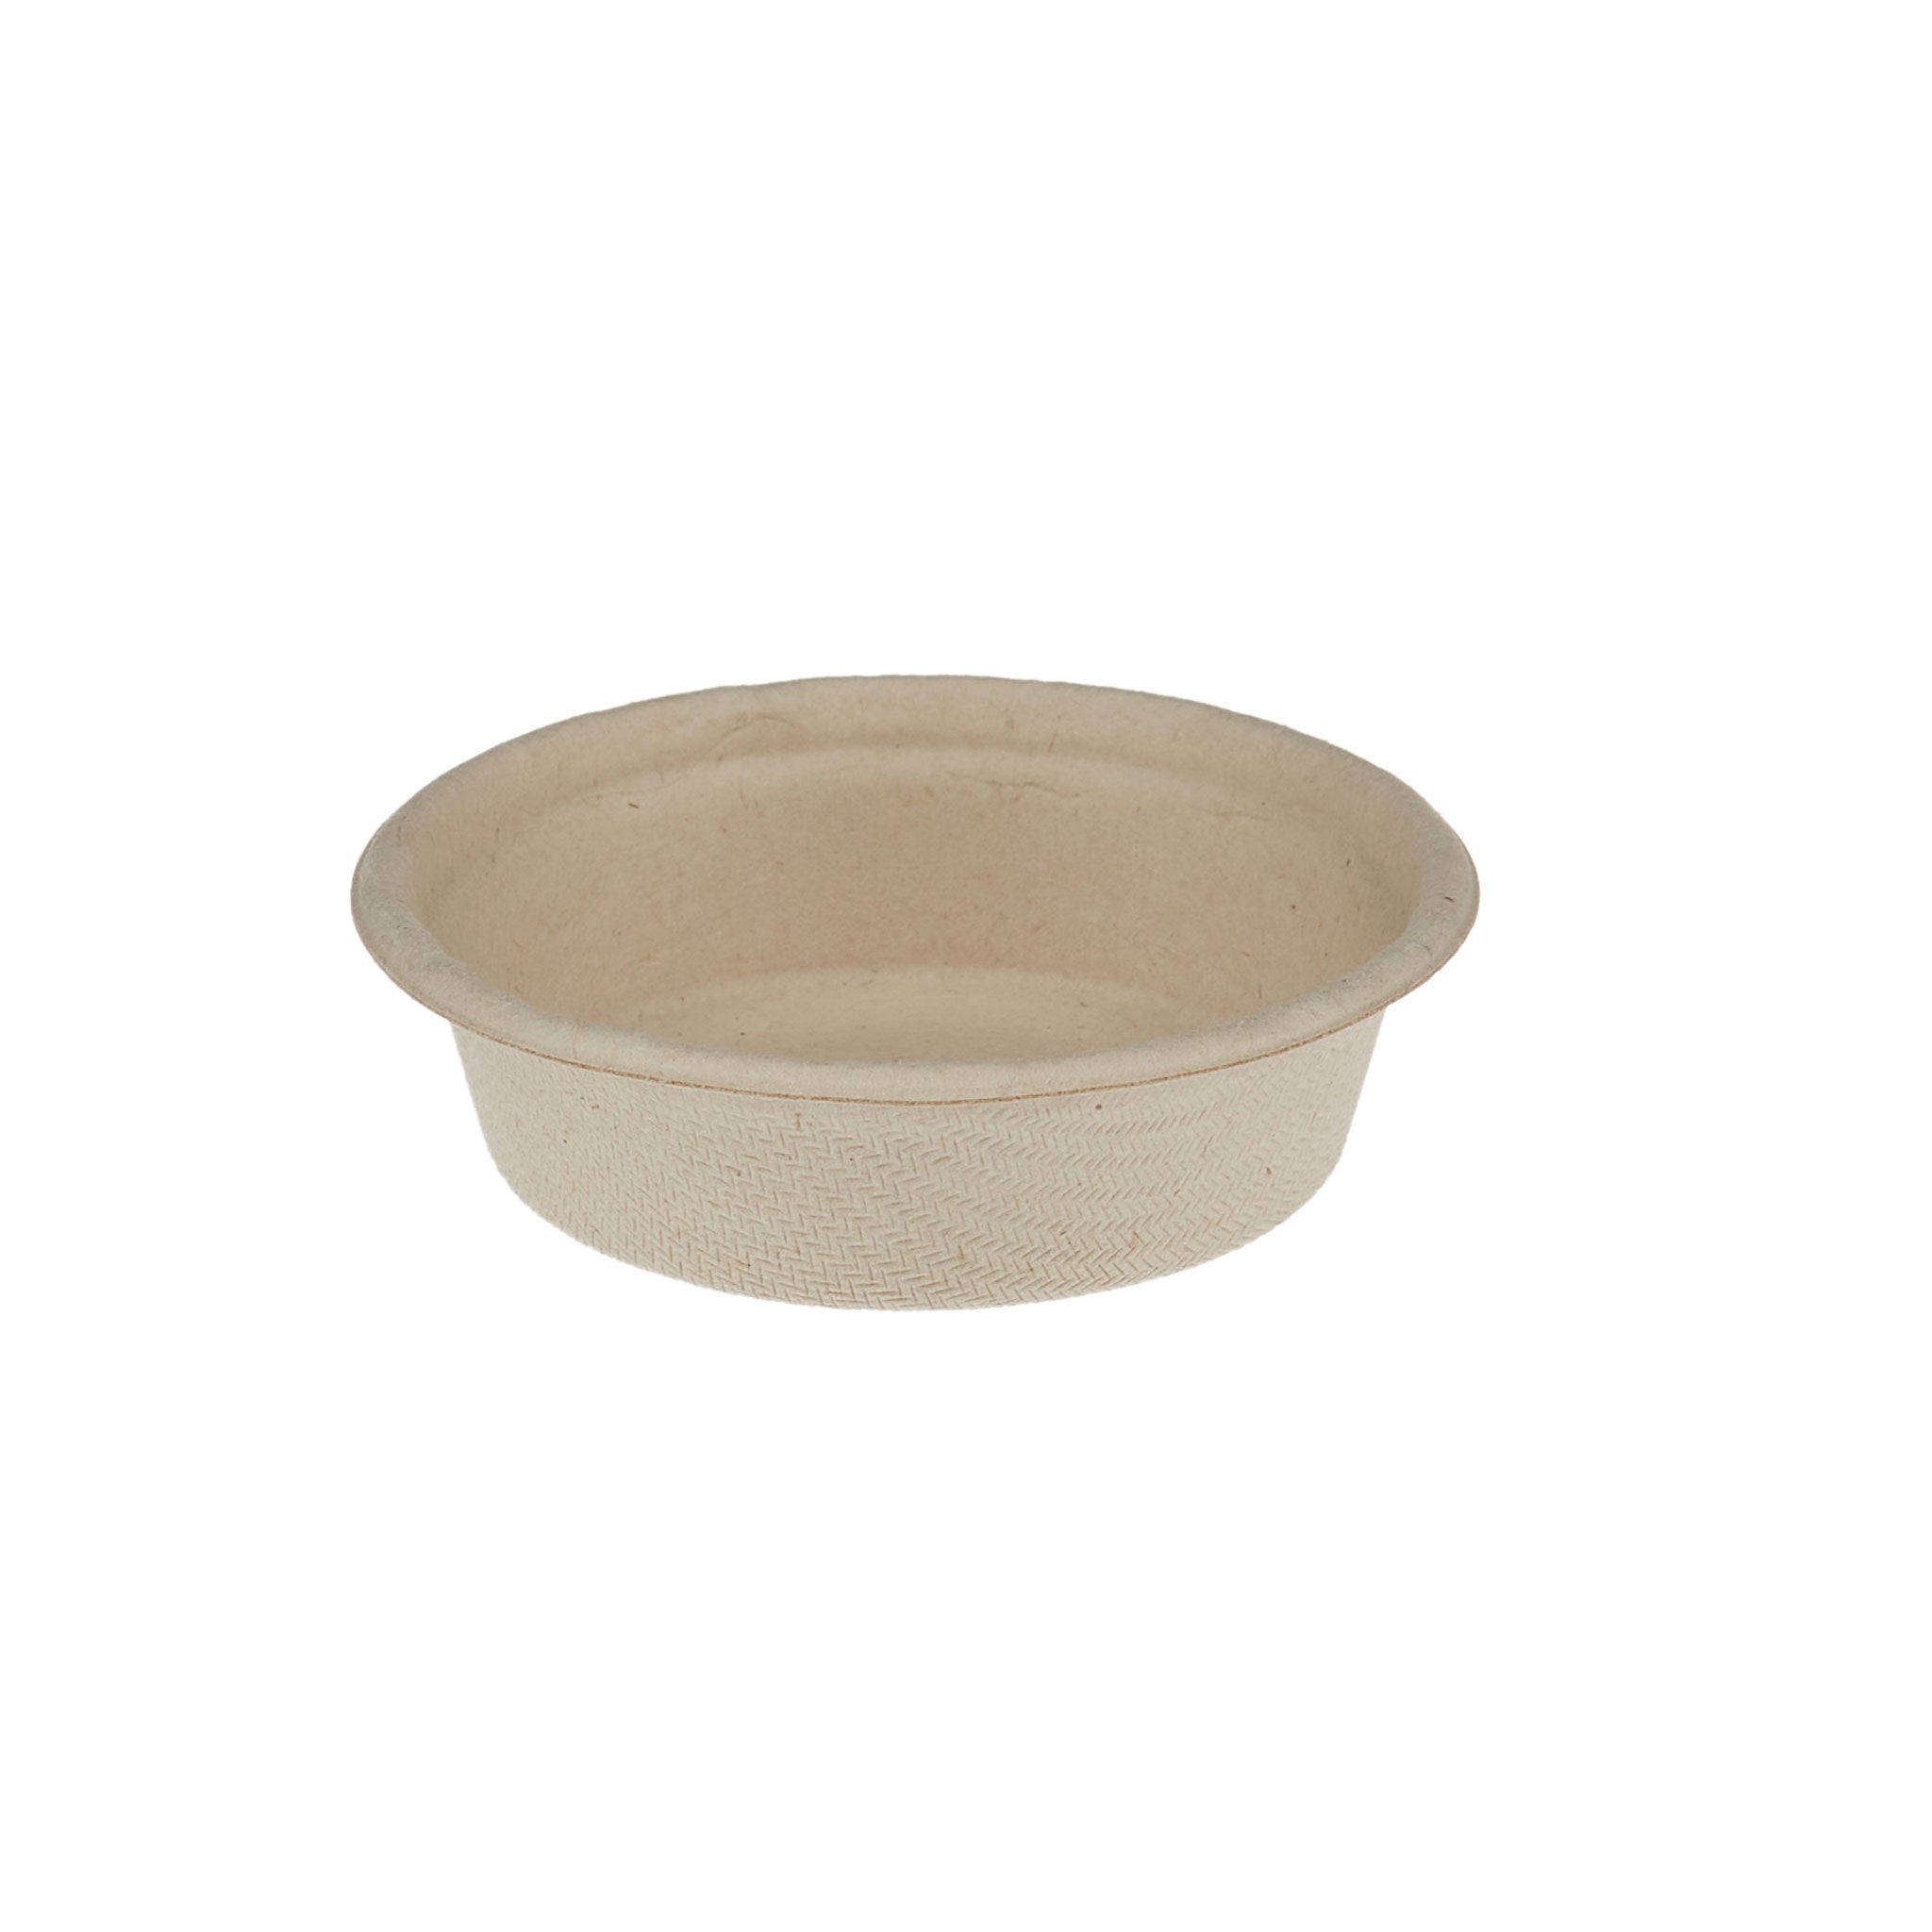 2000 Pieces Bio Degradable Portion Cup  - Hotpack